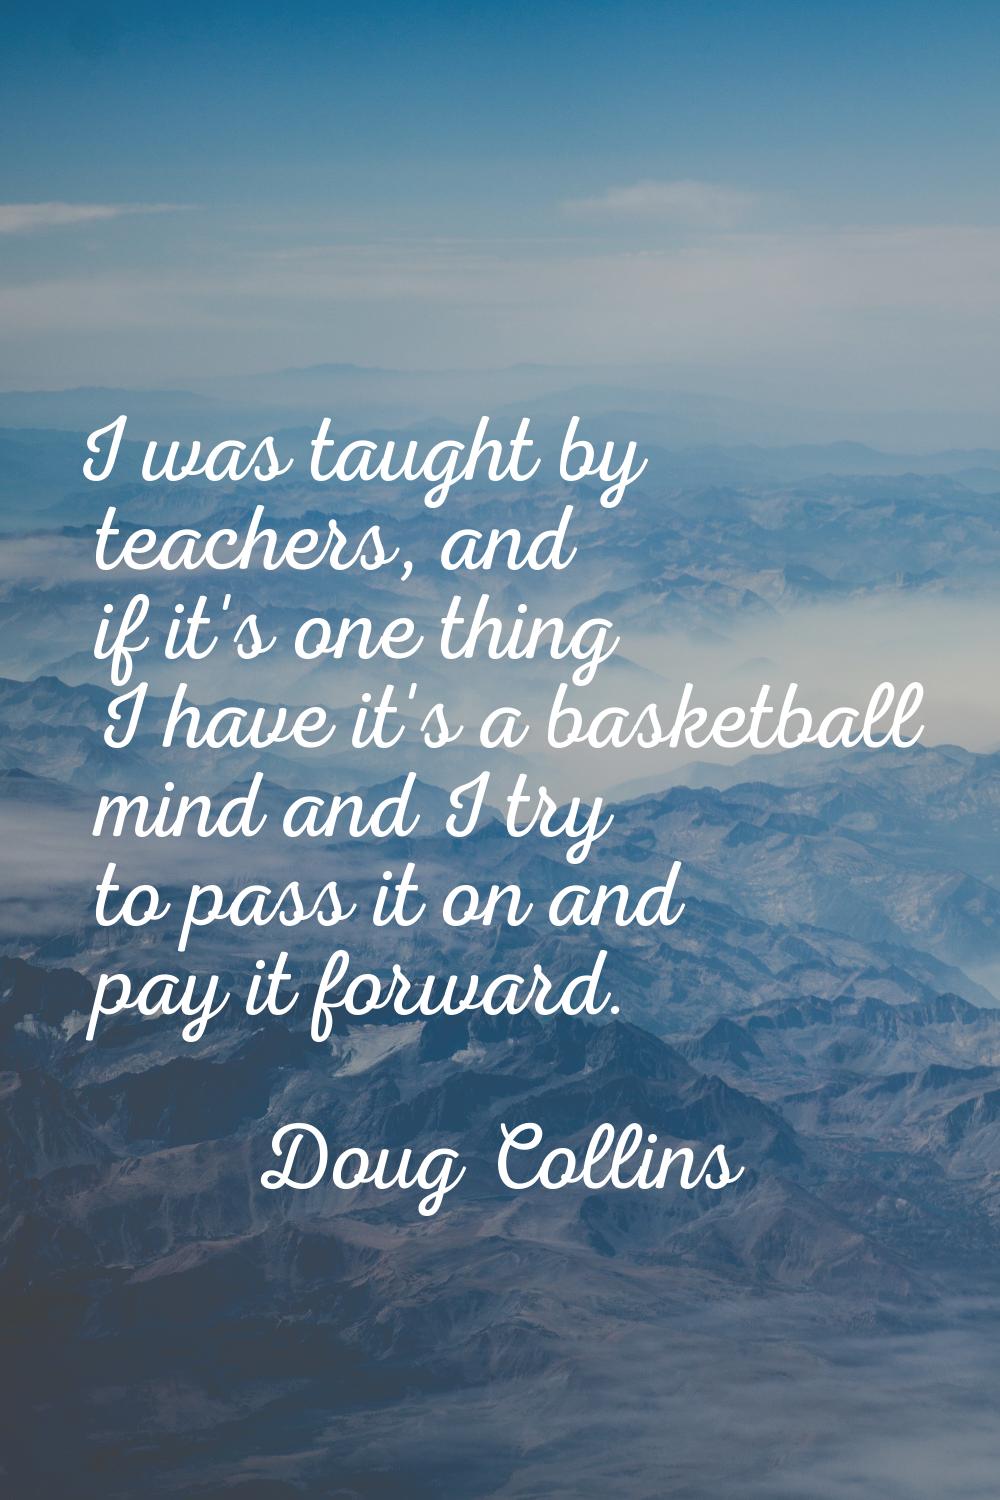 I was taught by teachers, and if it's one thing I have it's a basketball mind and I try to pass it 